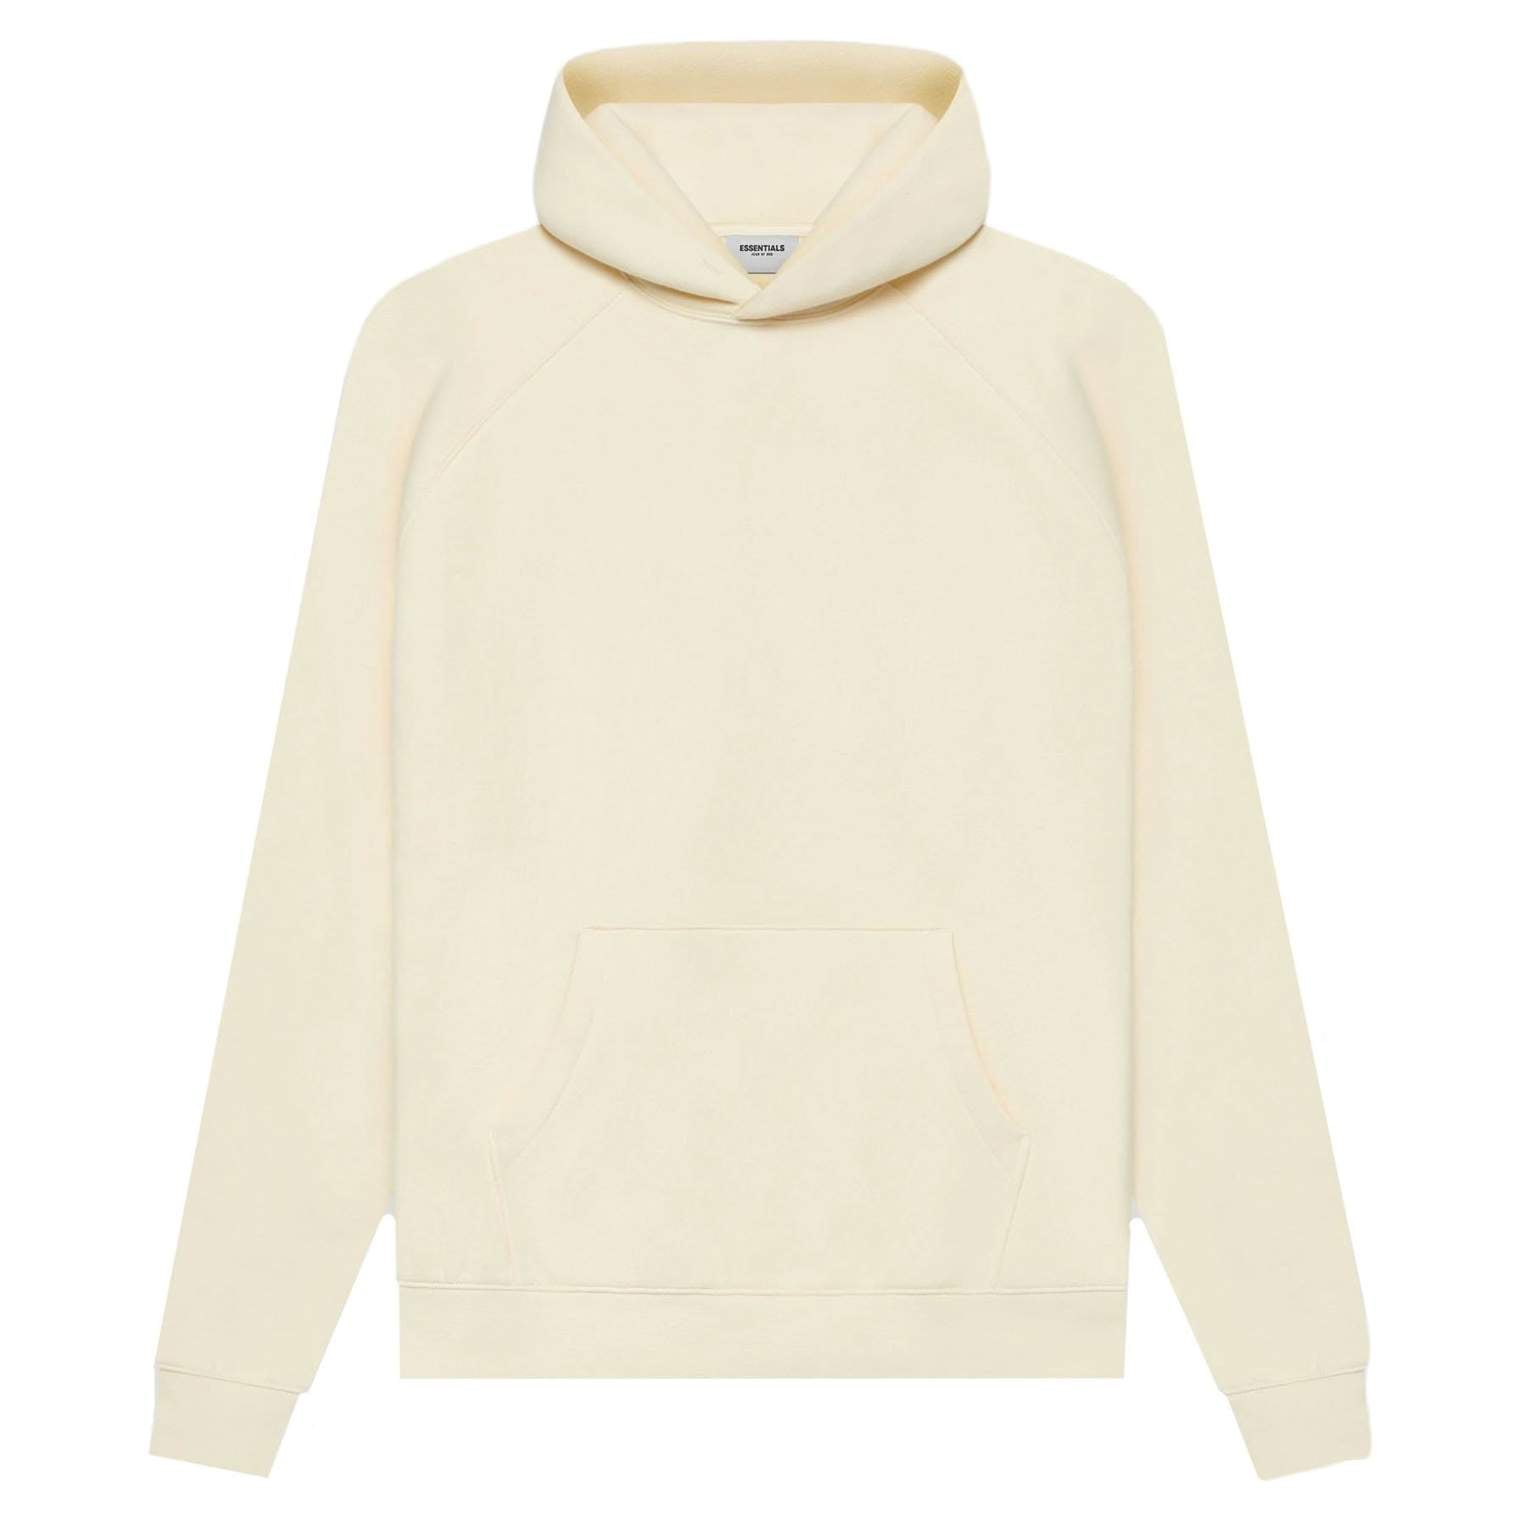 Double Boxed hoodie 249.99 FEAR OF GOD ESSENTIALS SS21 PULLOVER HOODIE BUTTERCREAM Double Boxed